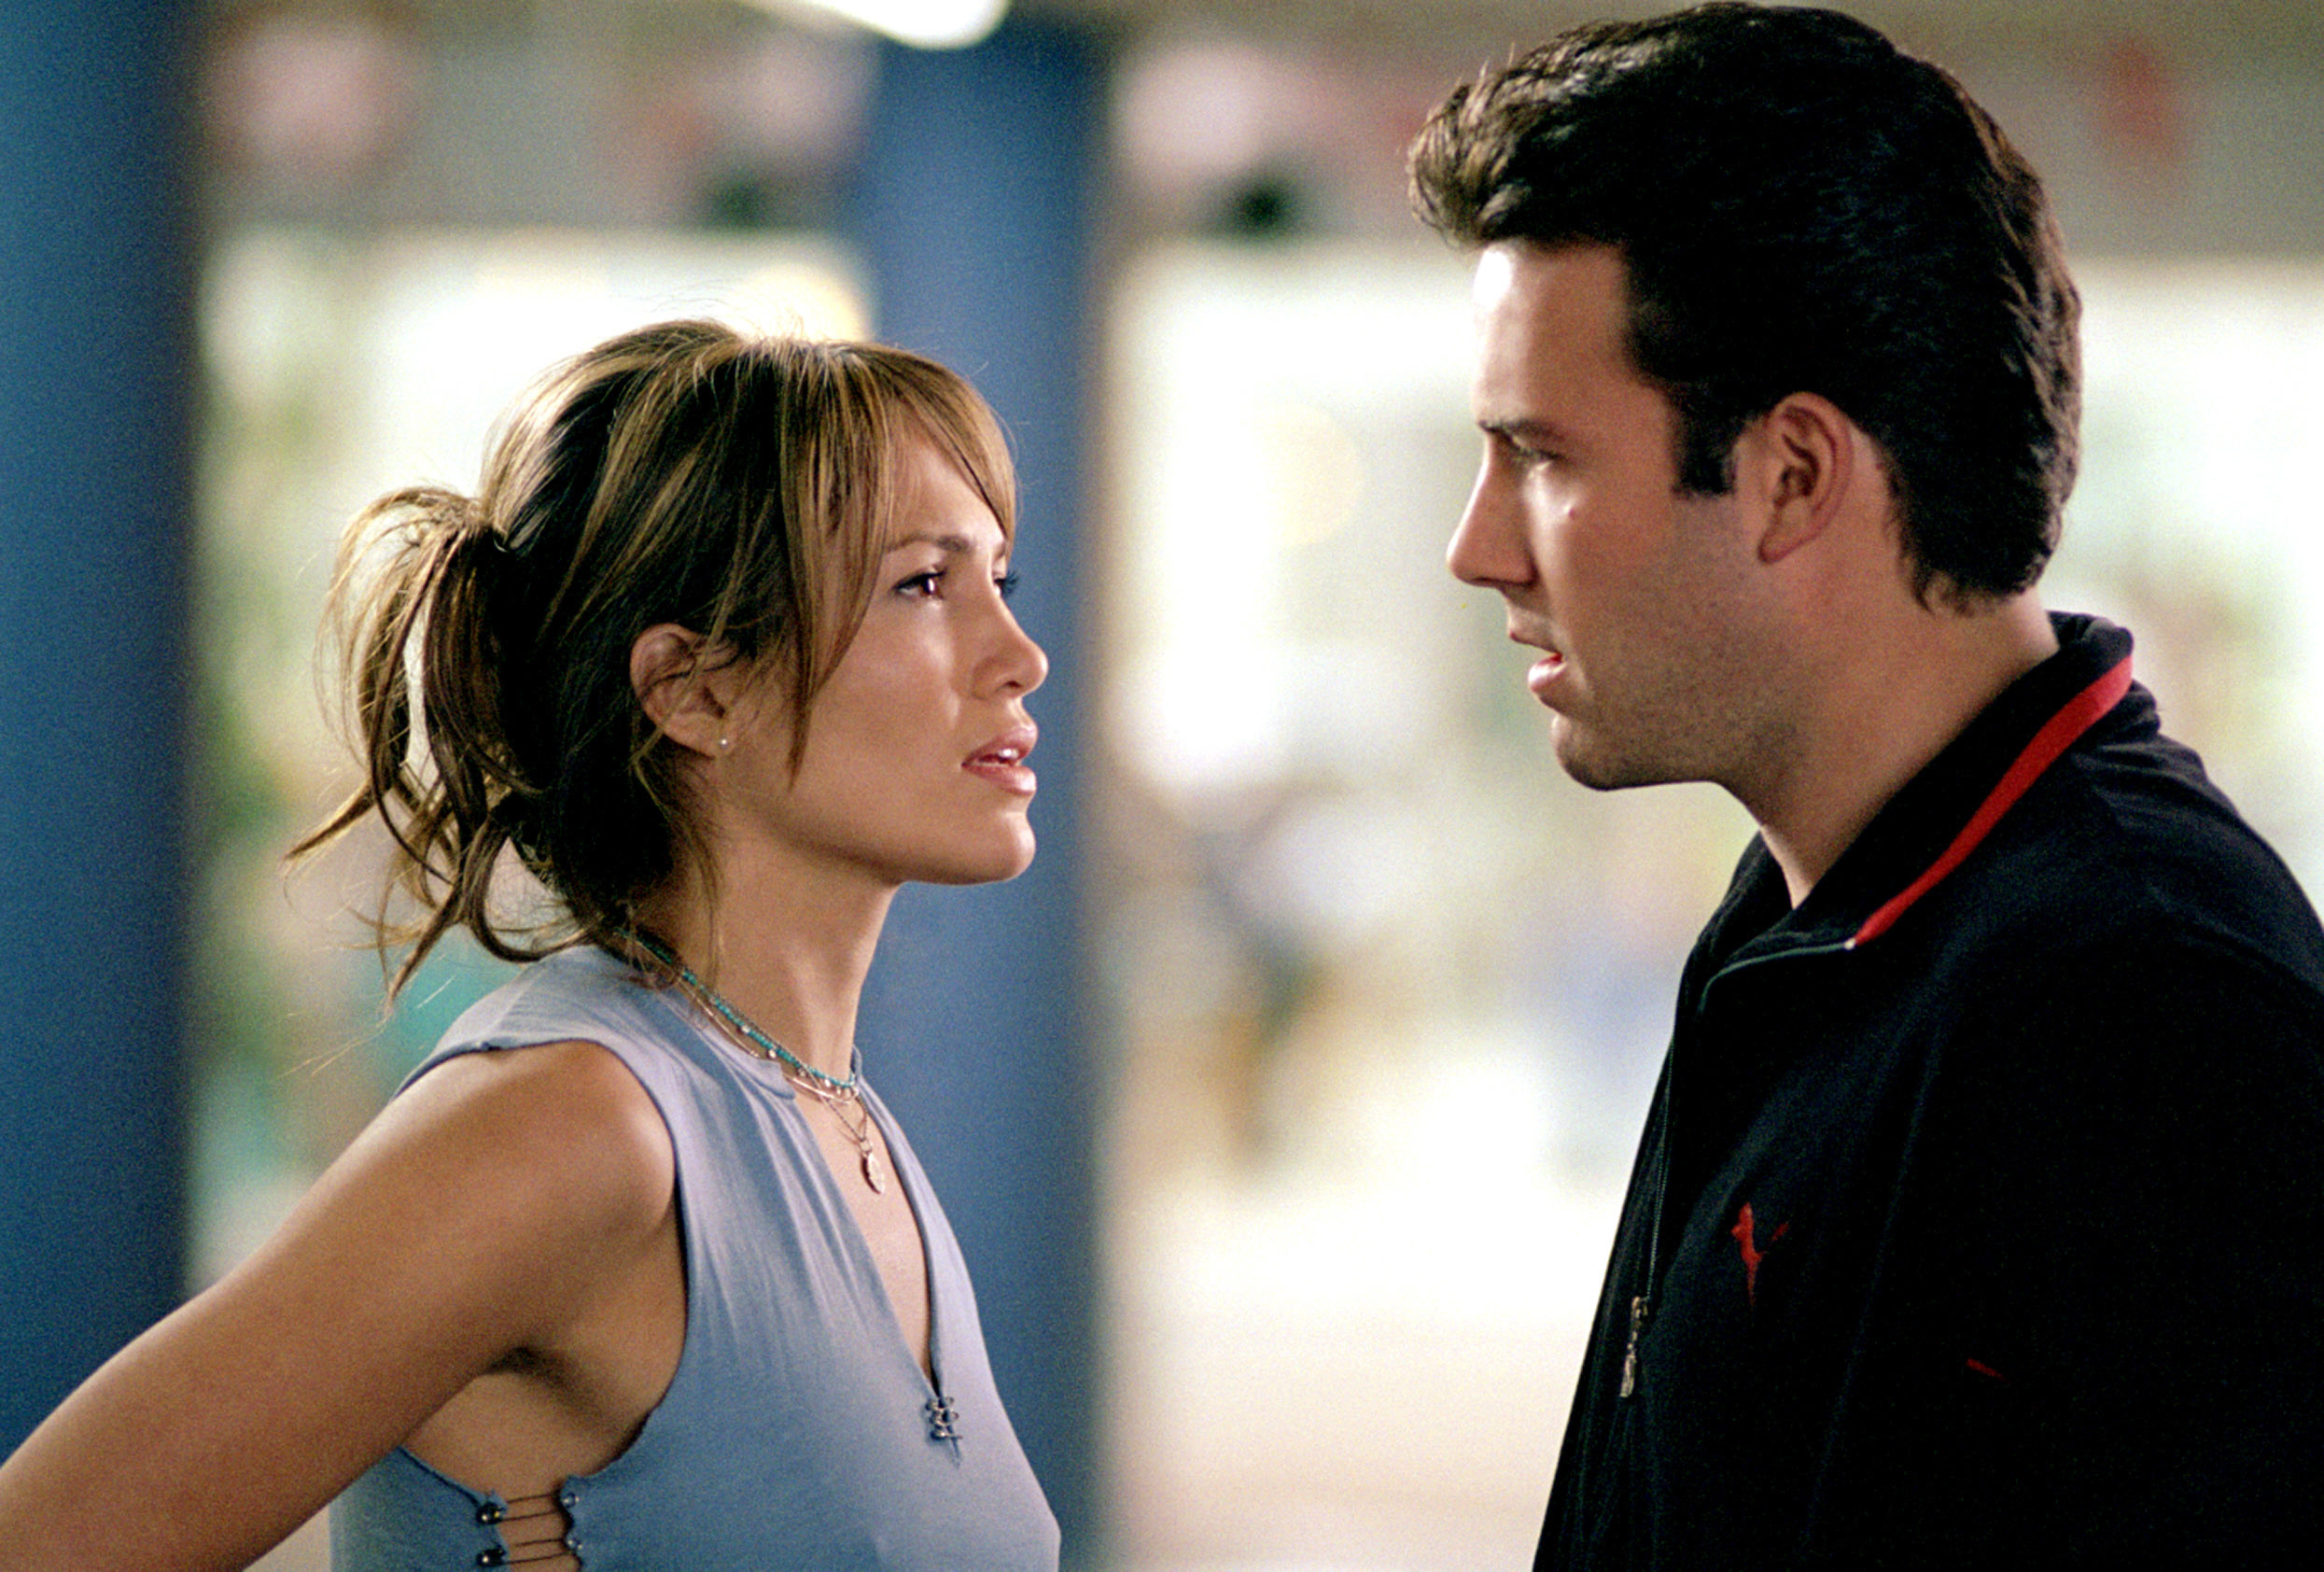 Jennifer Lopez and Ben Affleck looking frustrated with each other